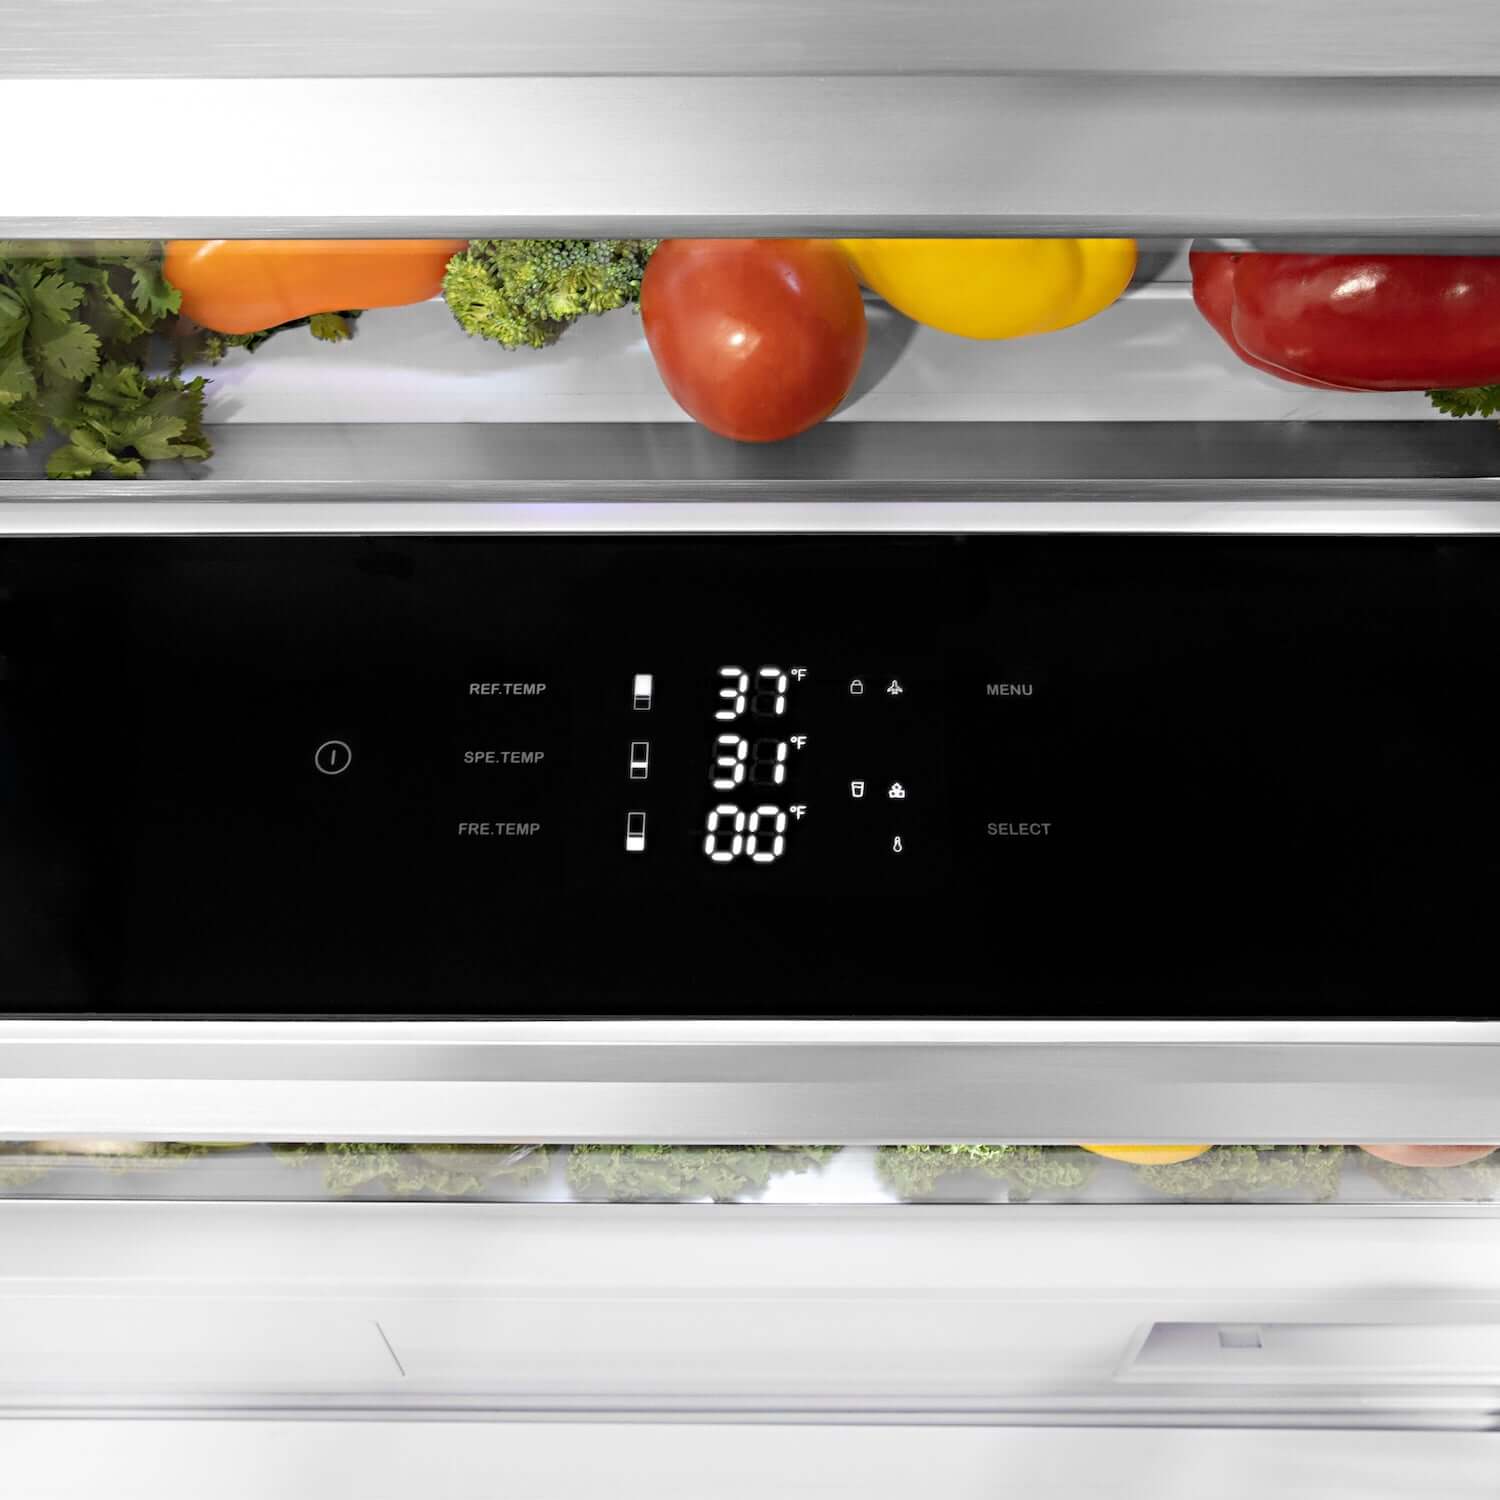 Digital ChillControl is an Easy-to-use LED display that allows you to quickly change temperatures and modes of this ZLINE built-in refrigerator.